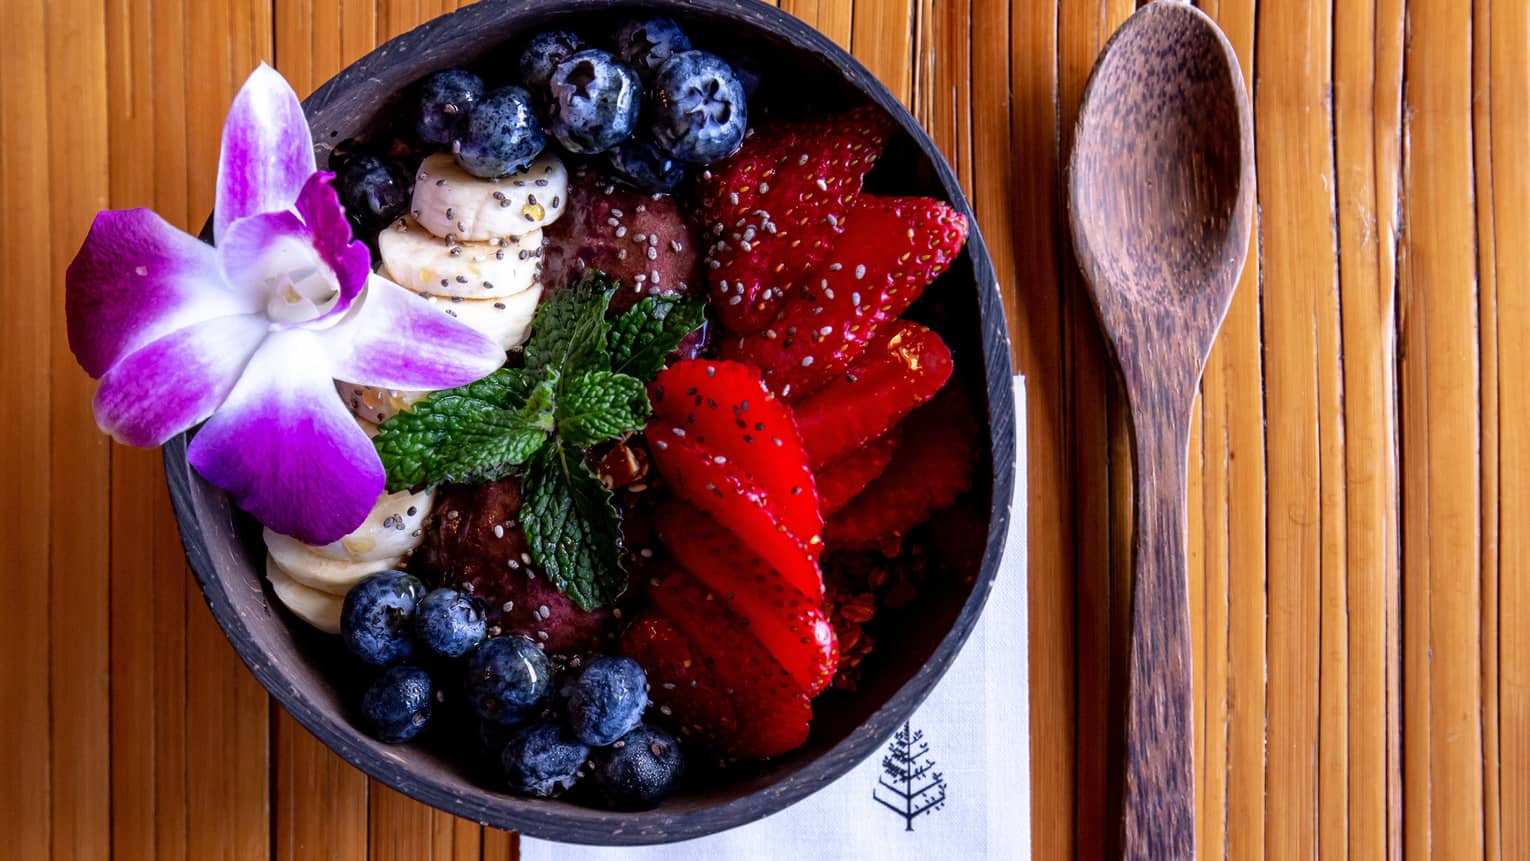 Acai bowl with strawberries, blueberries and a Hawaiian flower